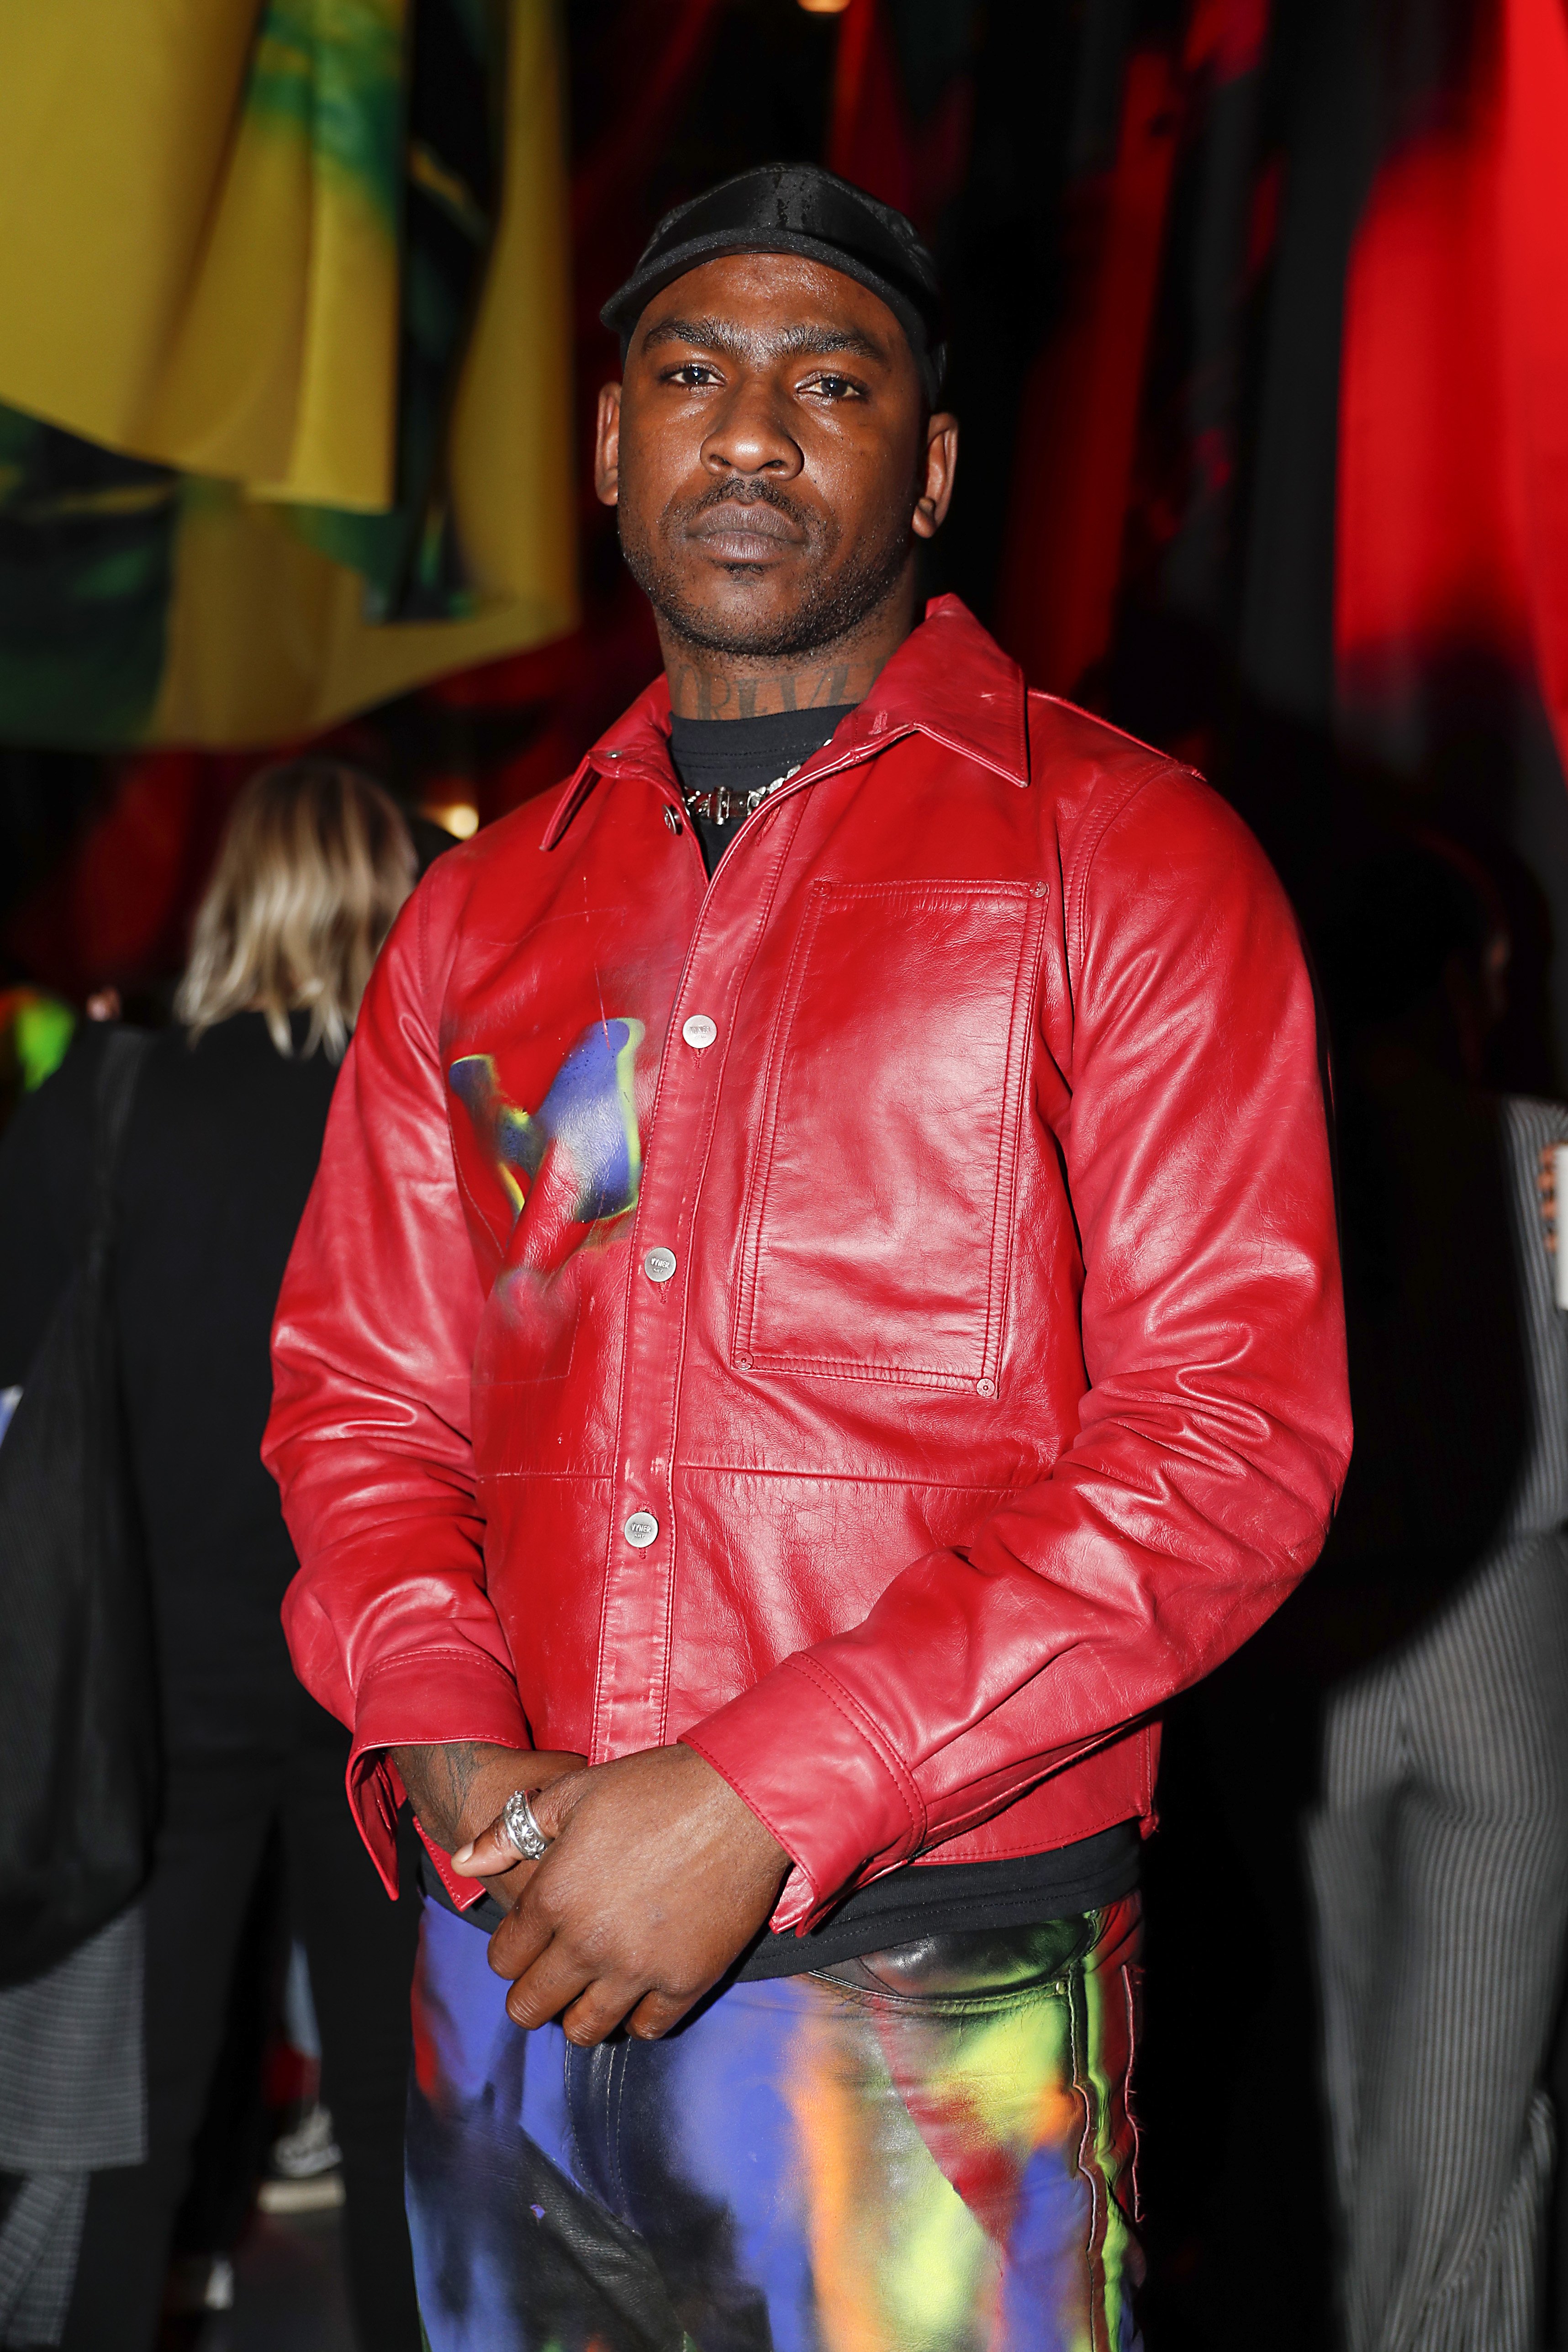  Skepta at the launch of 'Silent Madness' by Fashion Designer Mowalola on December 05, 2019. | Photo: Getty Images.